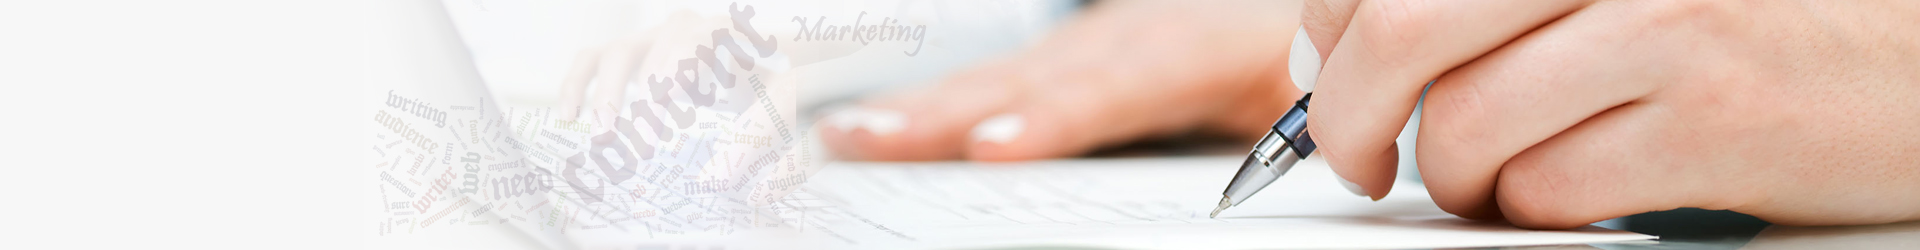 Content marketing strategy,professional writing services